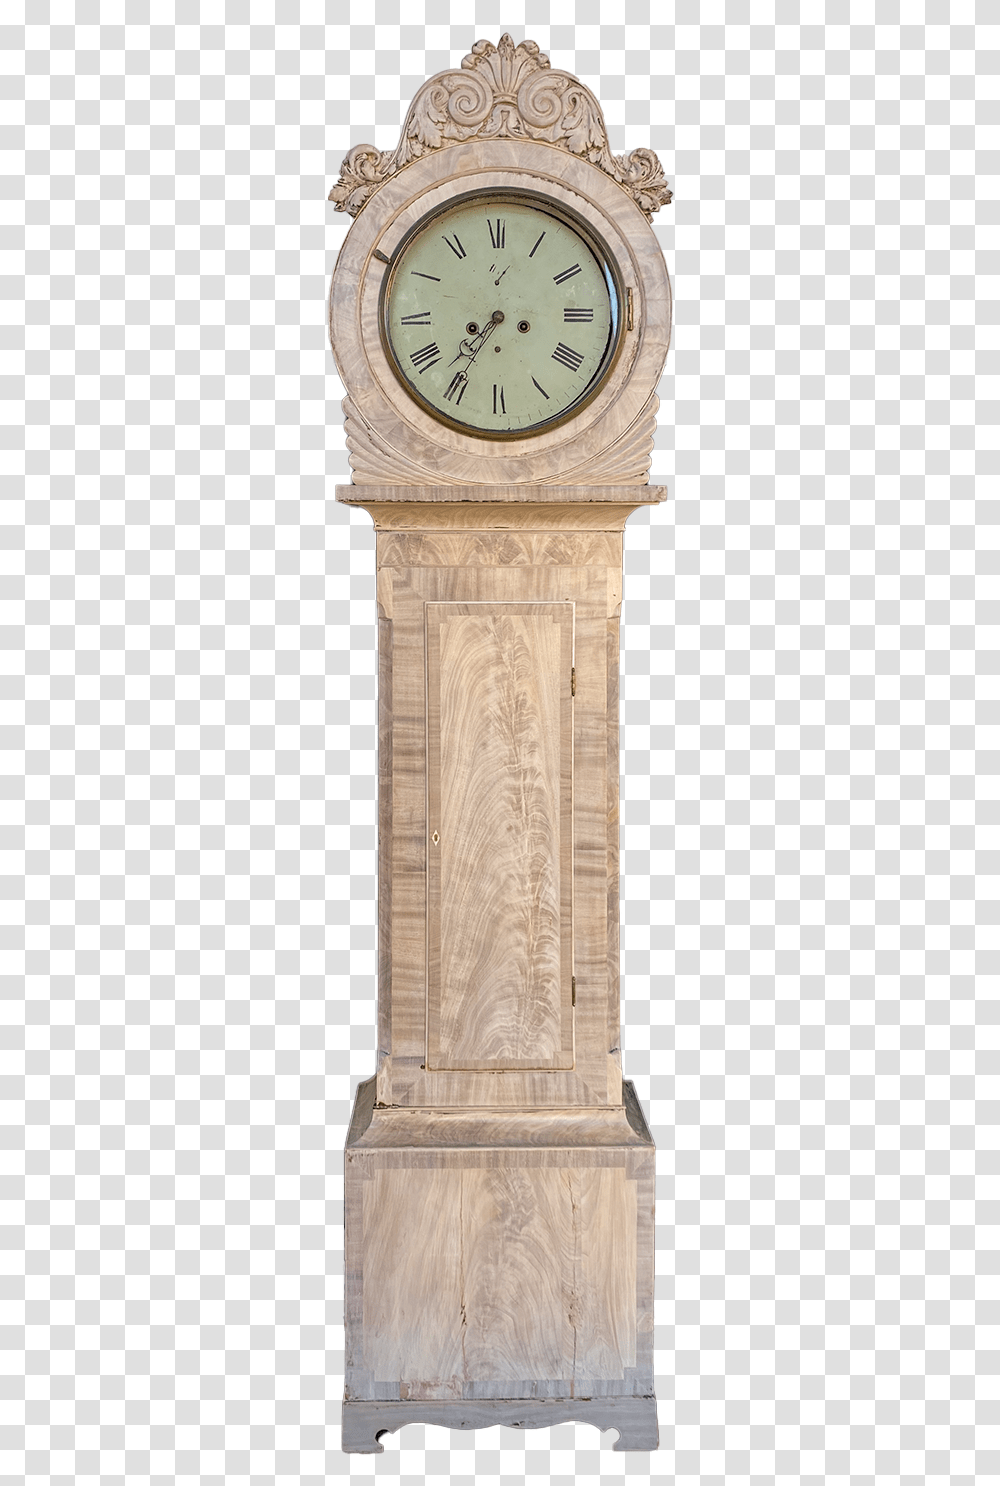 Bleached Grandfather ClockClass Lazyload Lazyload Longcase Clock, Tabletop, Furniture, Clock Tower, Architecture Transparent Png